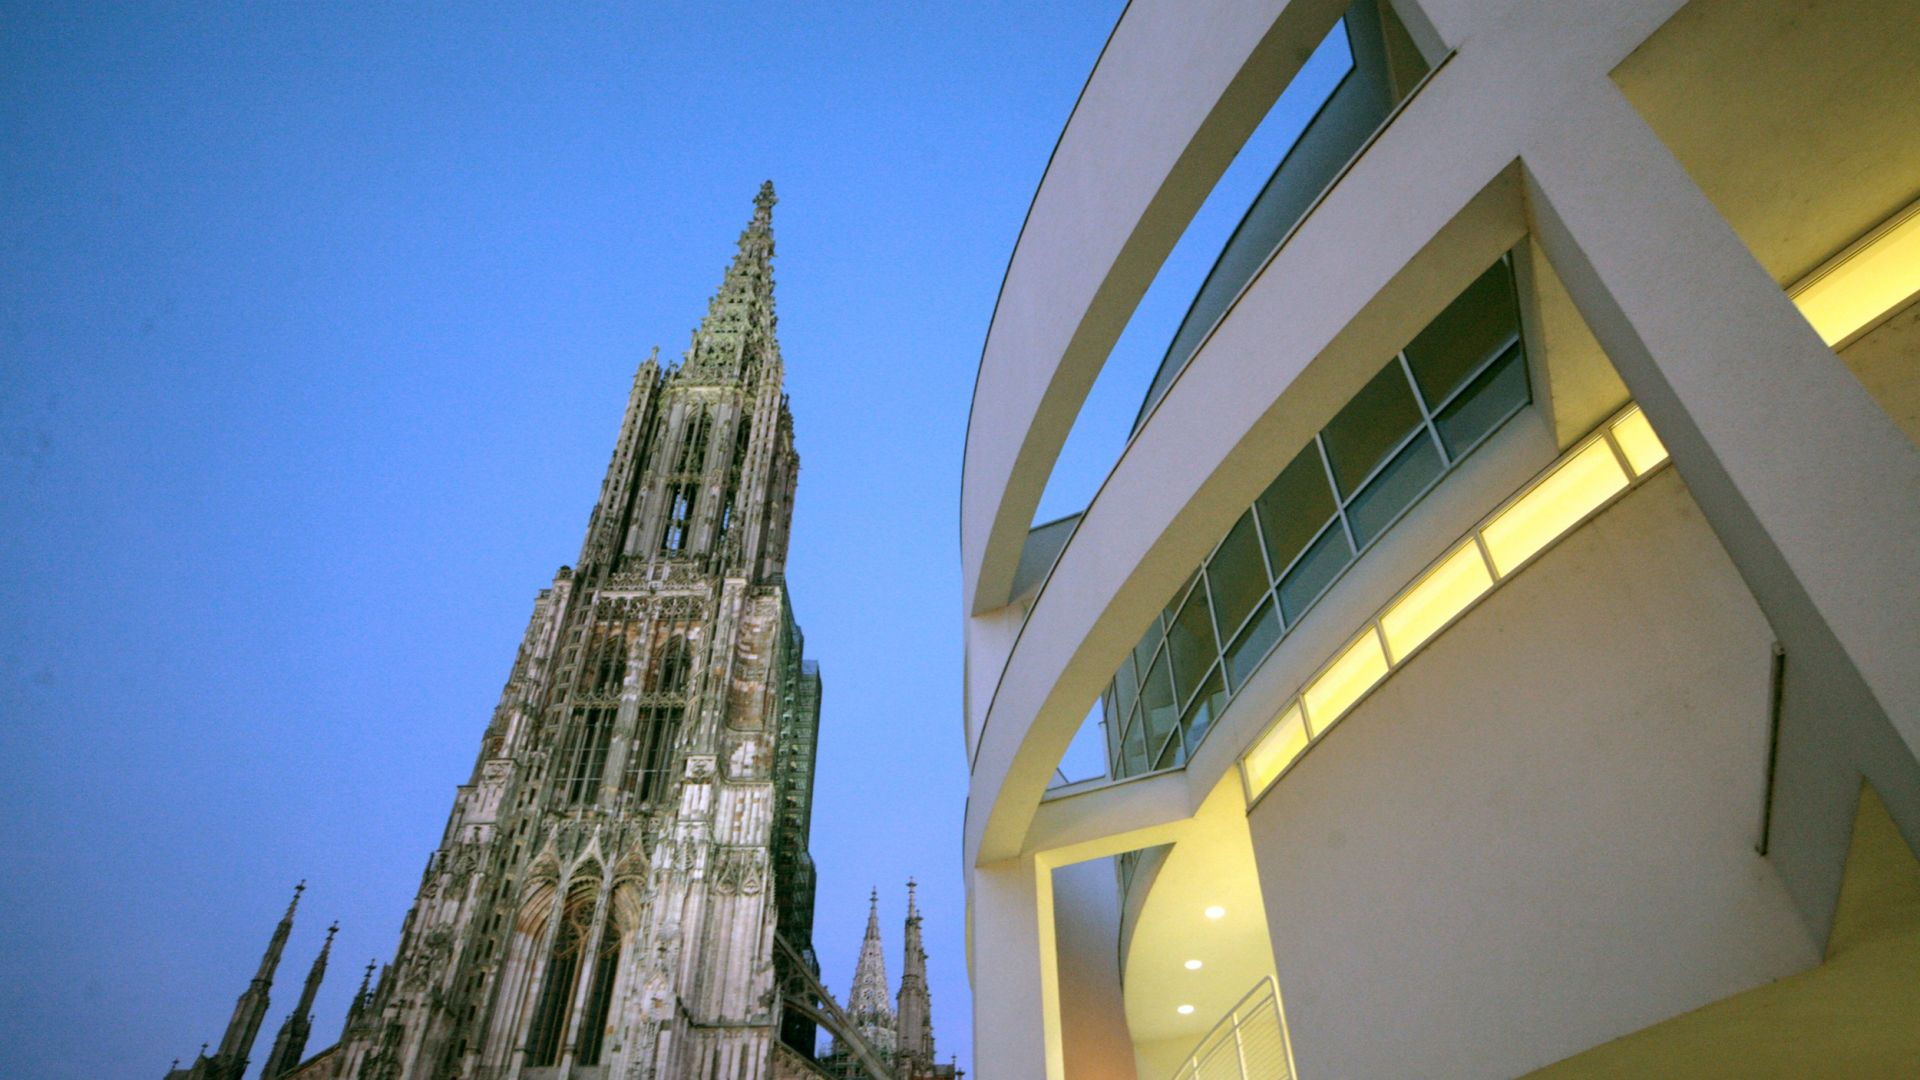 Ulm: Cathedral and townhall